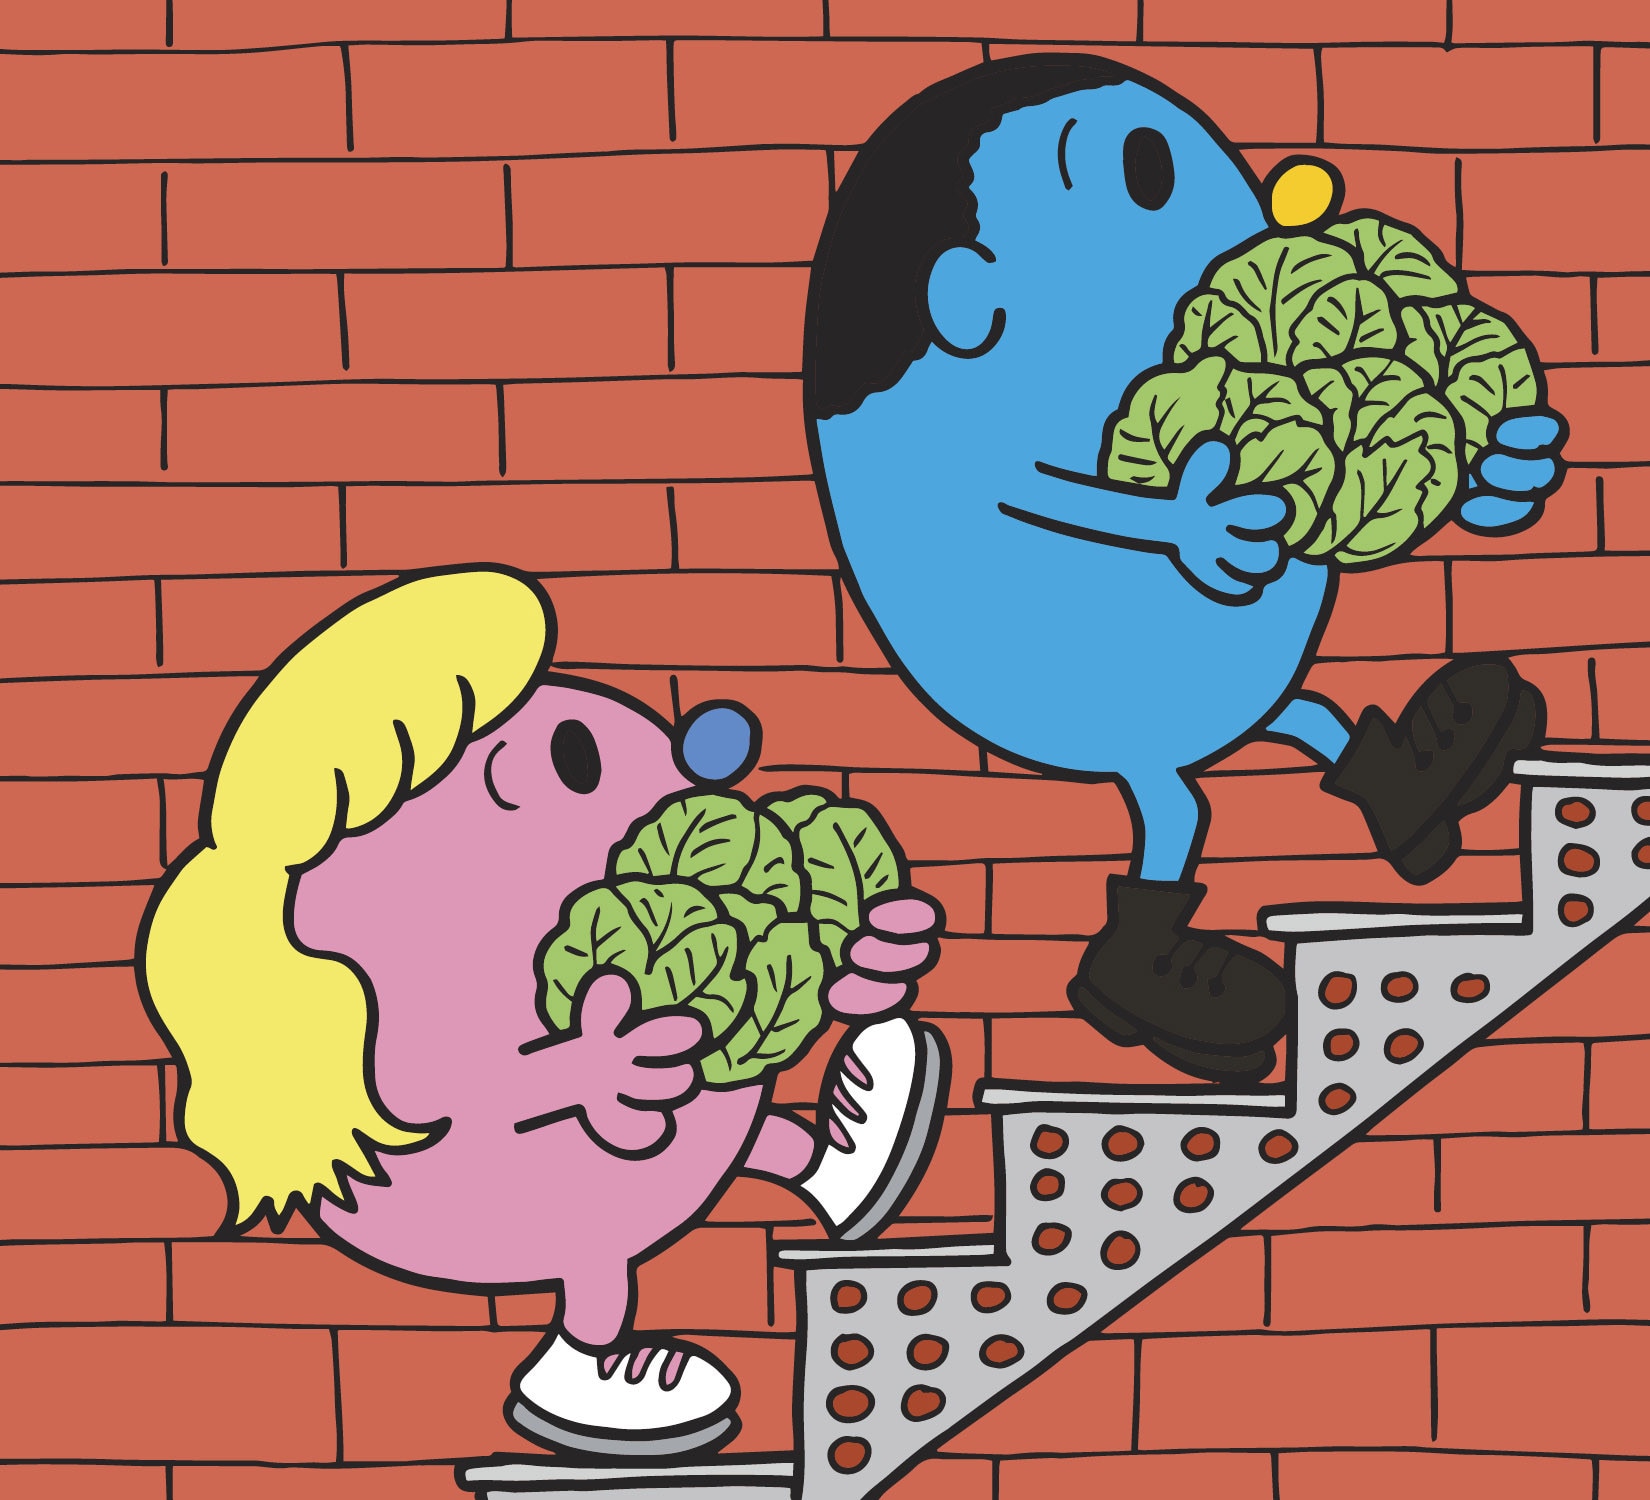 Dr Ninth image - characters walking up stairs holding cabbages